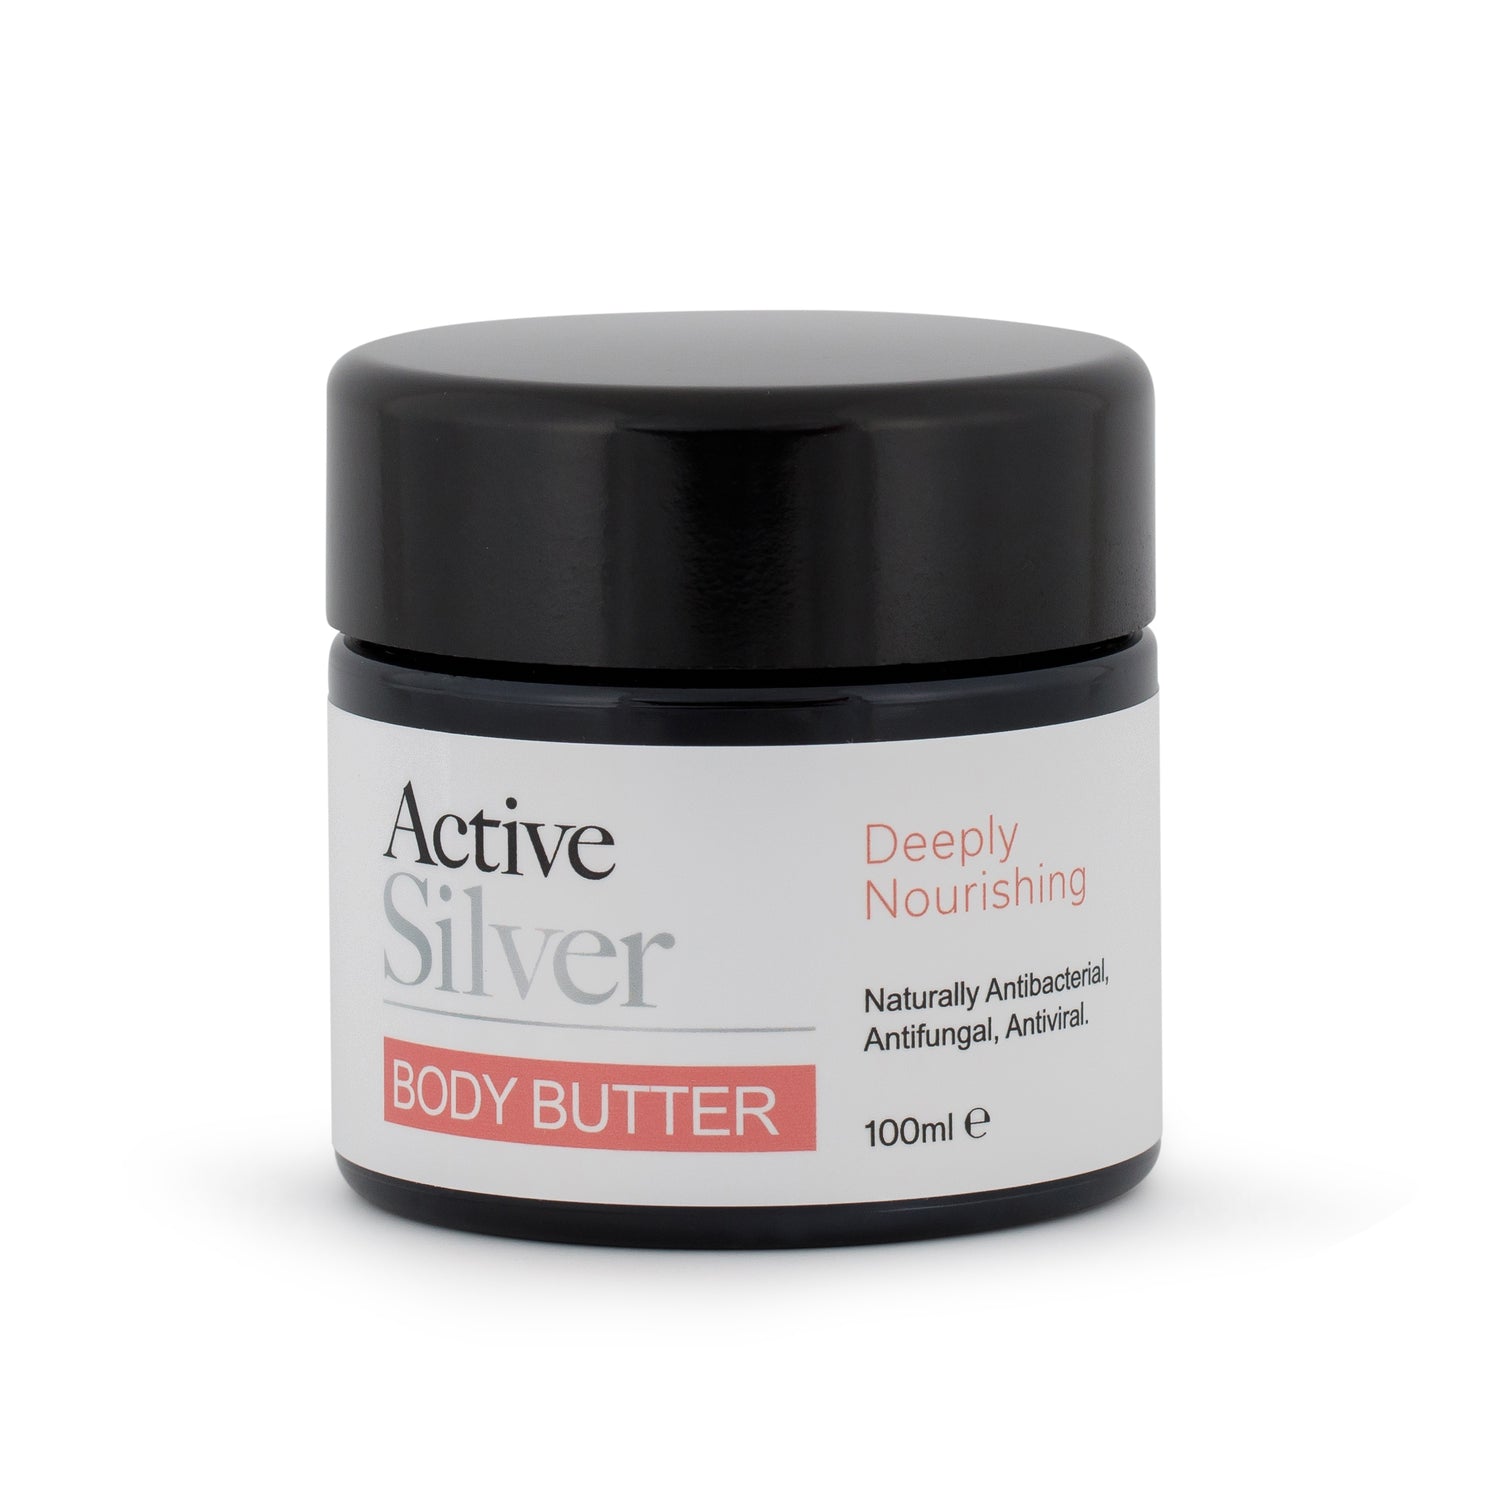 Active Silver Body Butter